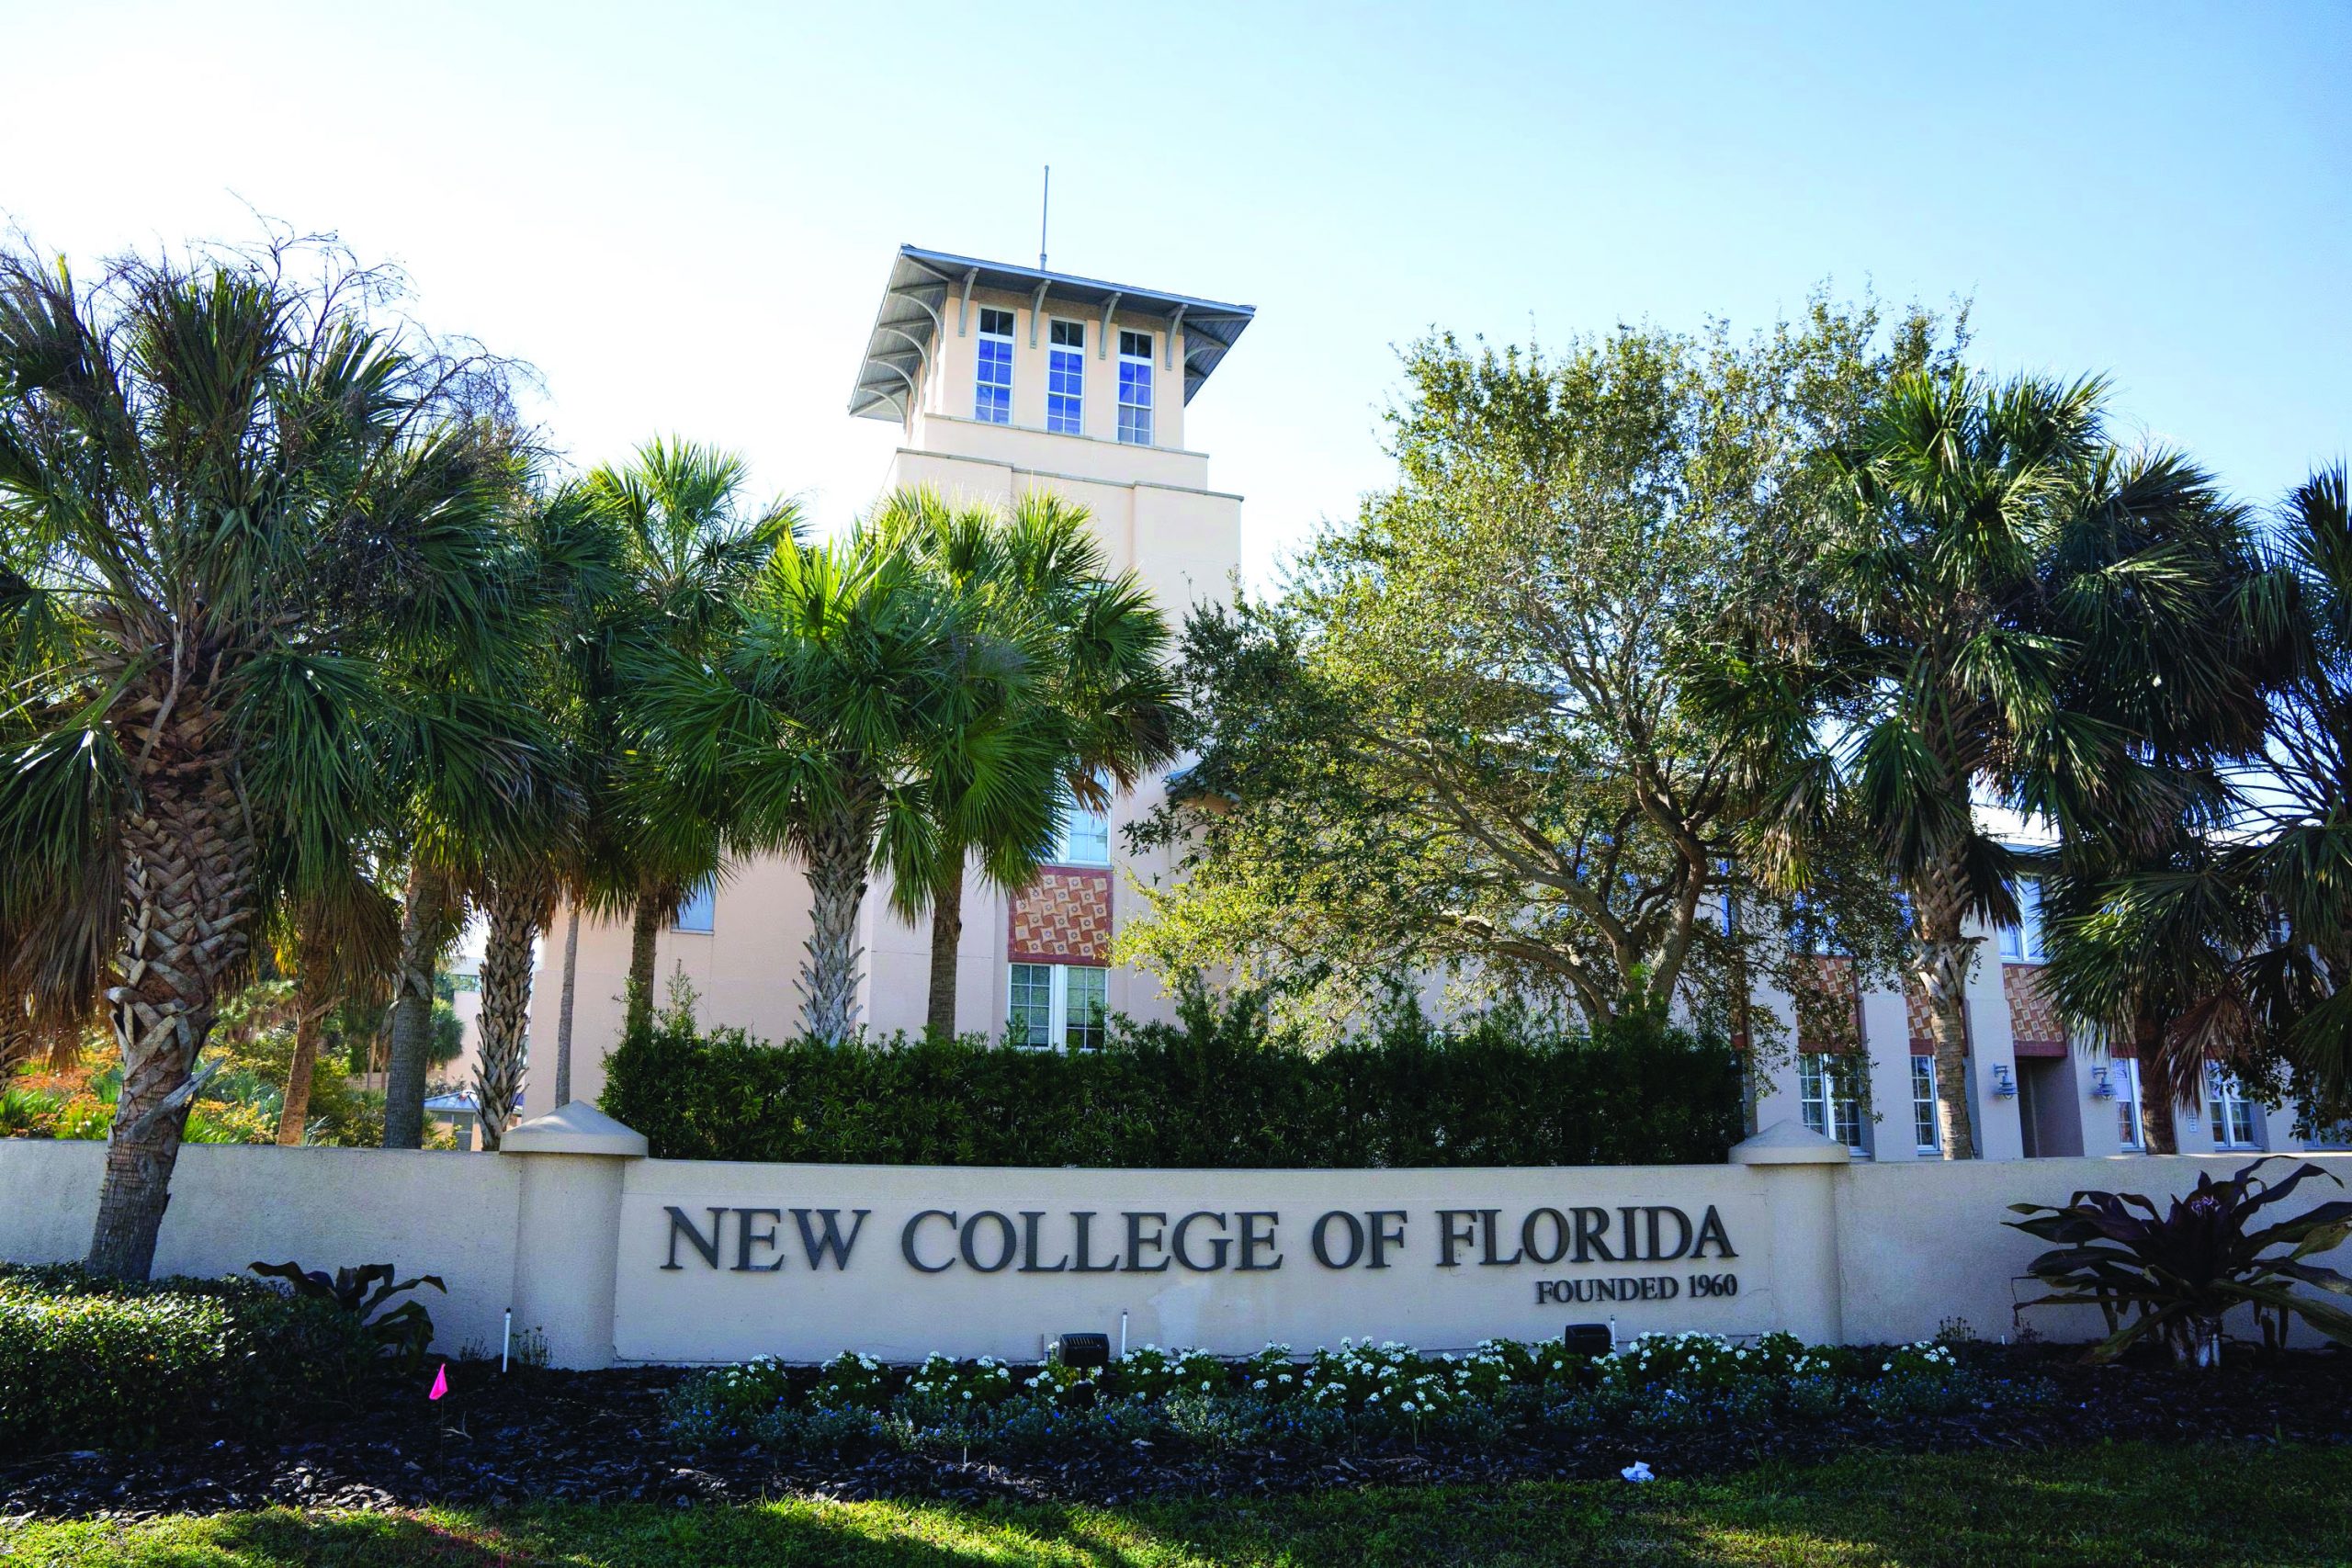 New COllege of Florida